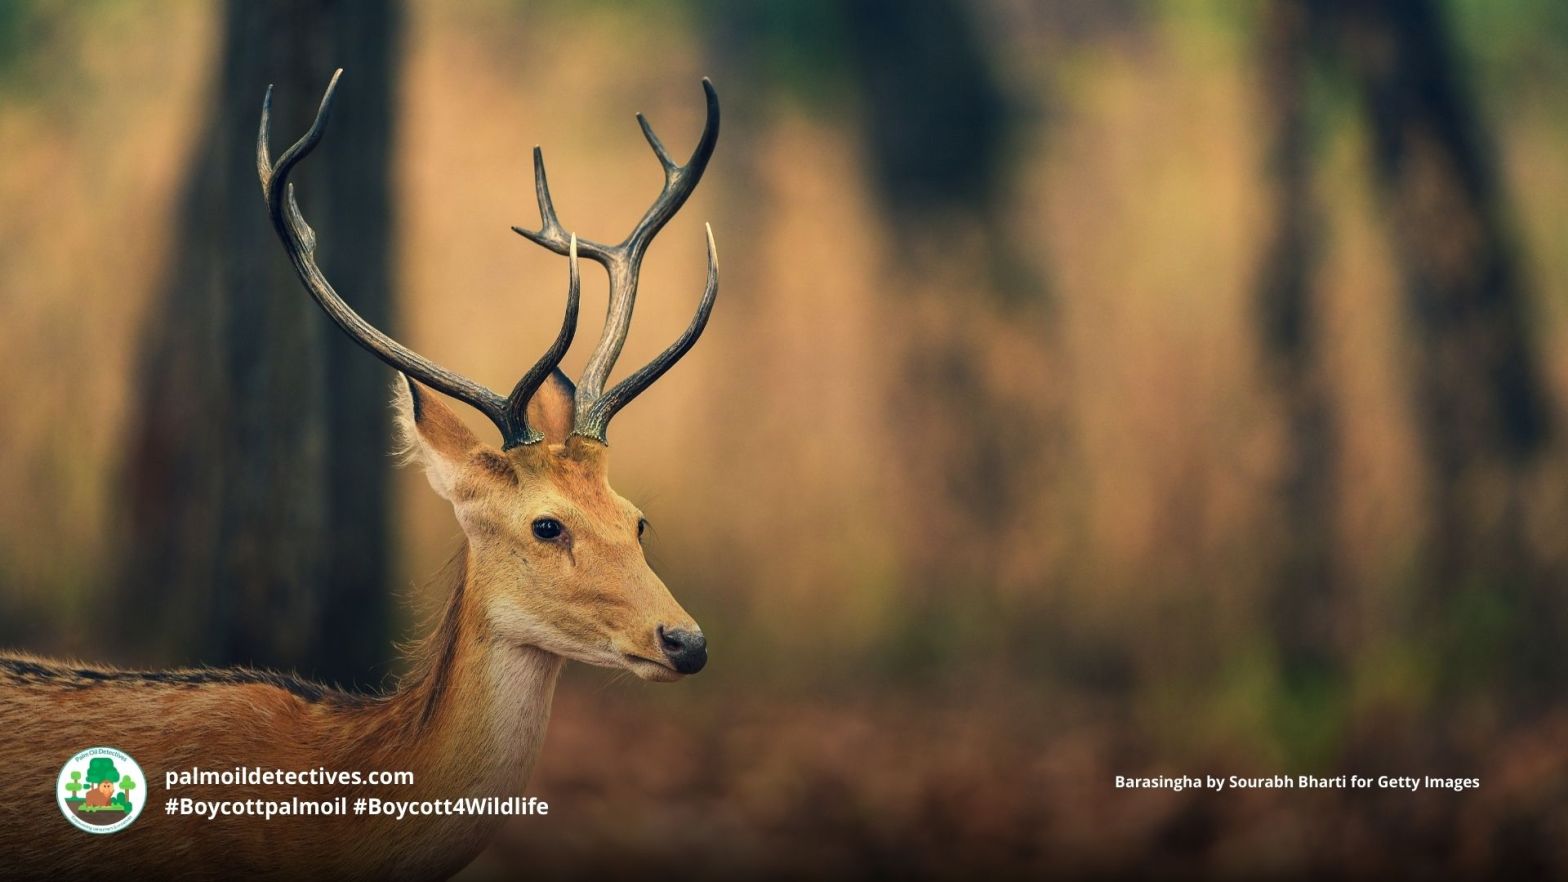 Barasingha by Sourabh Bharti for Getty Images